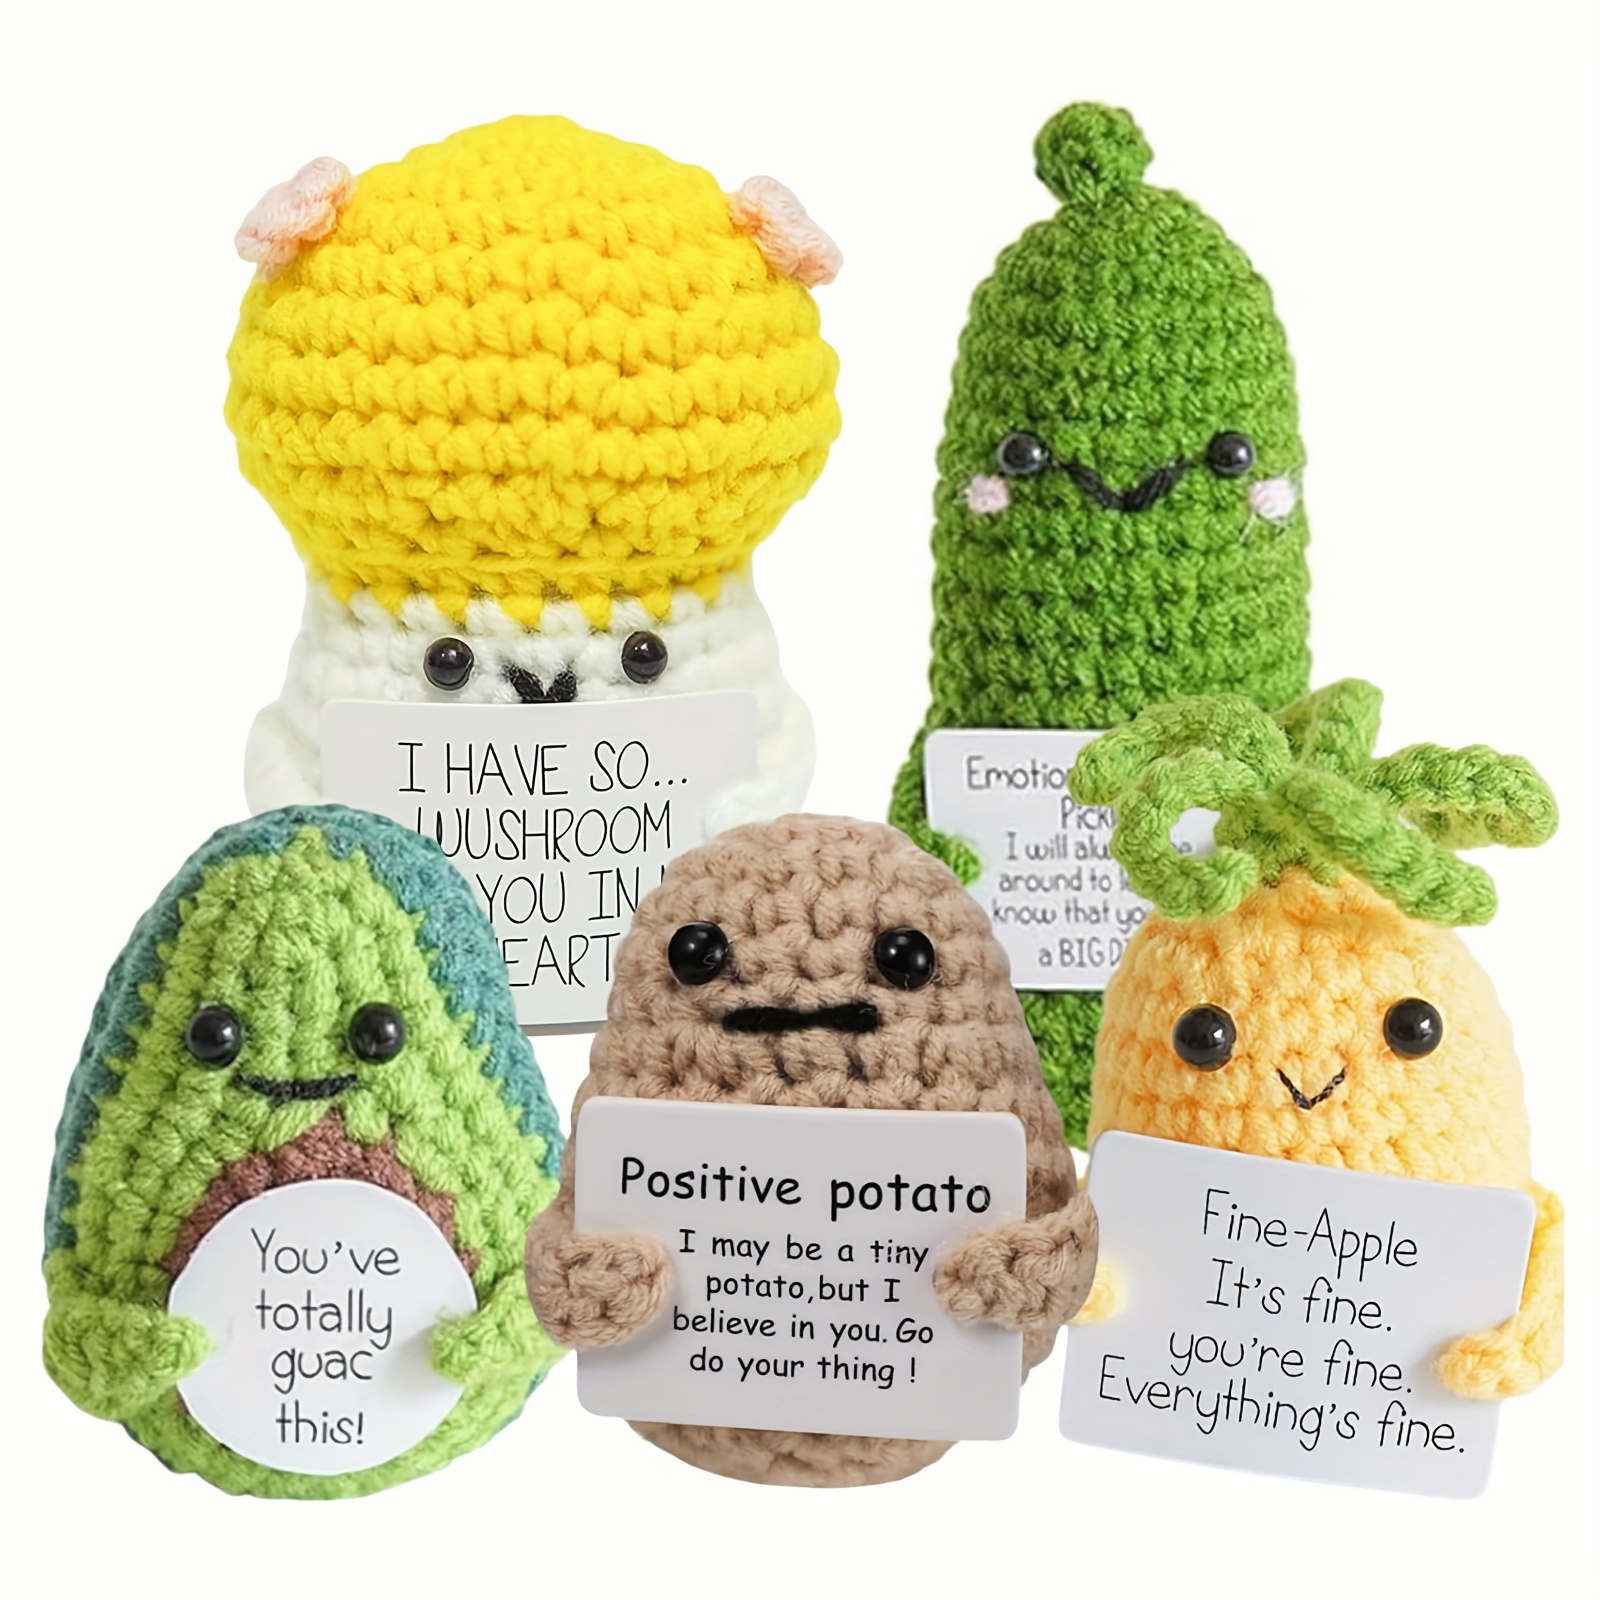 

5-piece Cute Emotional Support Plush Dolls Set - Positive Pickle, Potato, Avocado With Inspirational Cards - Crochet Crafted Encouragement Gifts For Friends